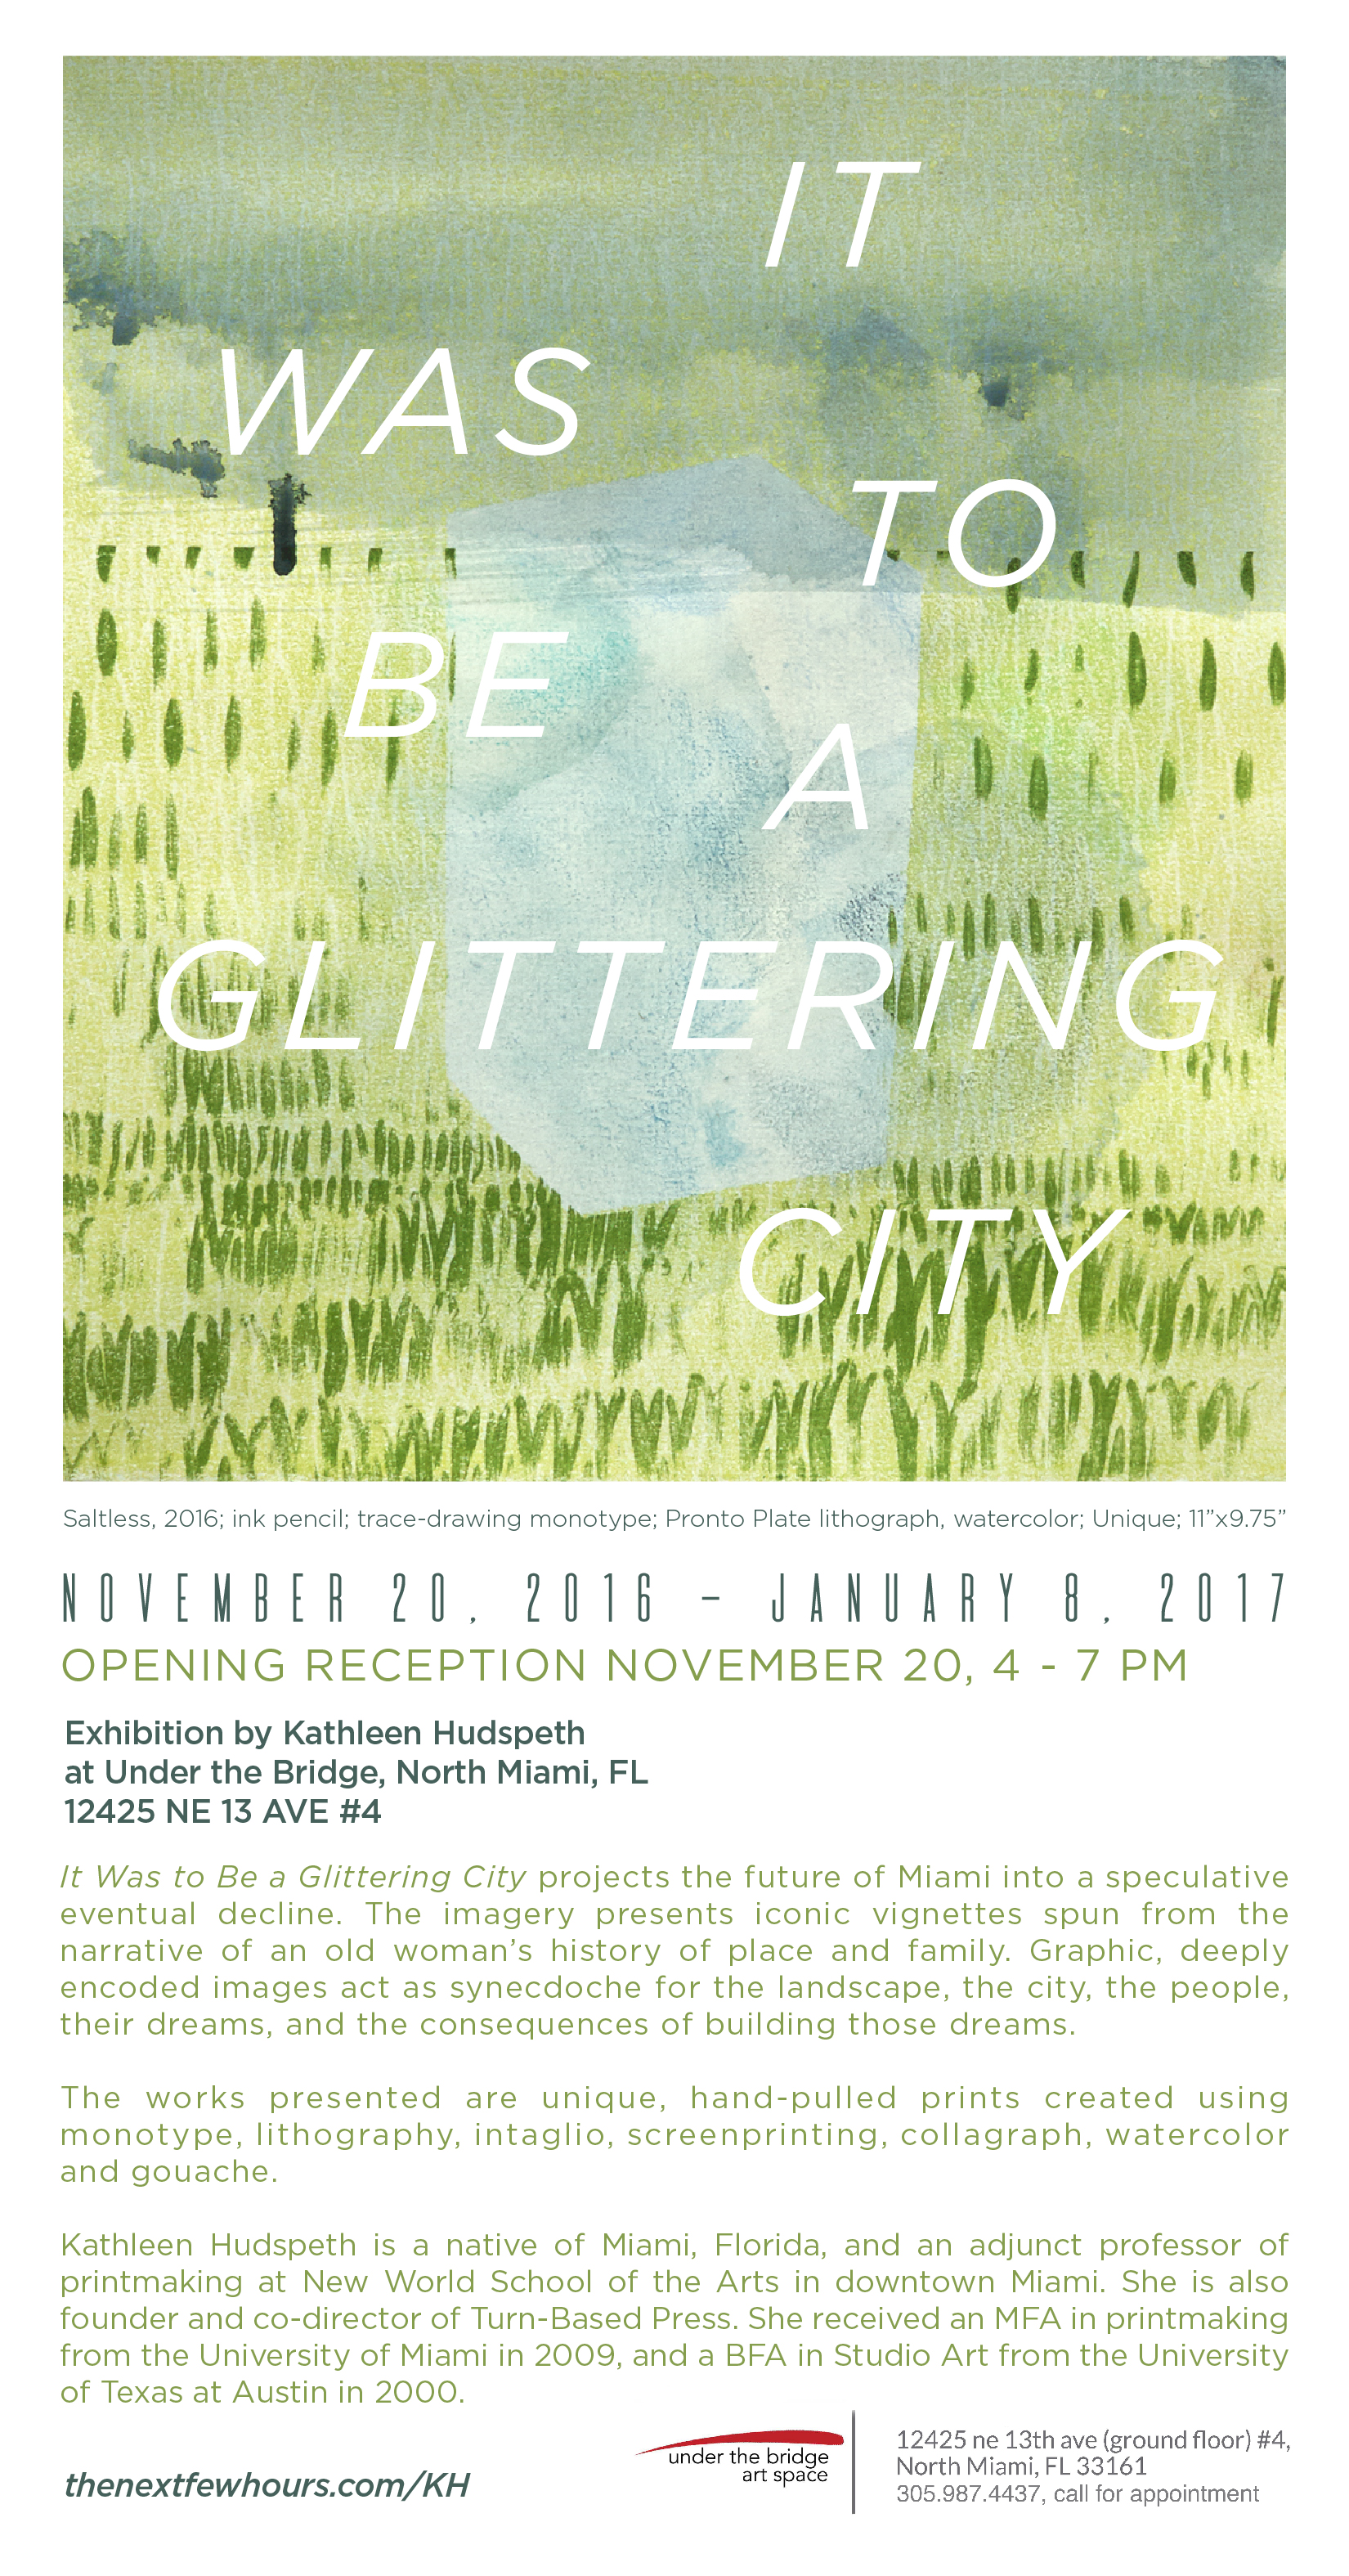 Opening November 20, 2016, at Under the Bridge art space, 12425 NE 13th Ave, # 4, North Miami, Florida. It Was to Be a Glittering City, an exhibition of monotypes by Kathleen Hudspeth.